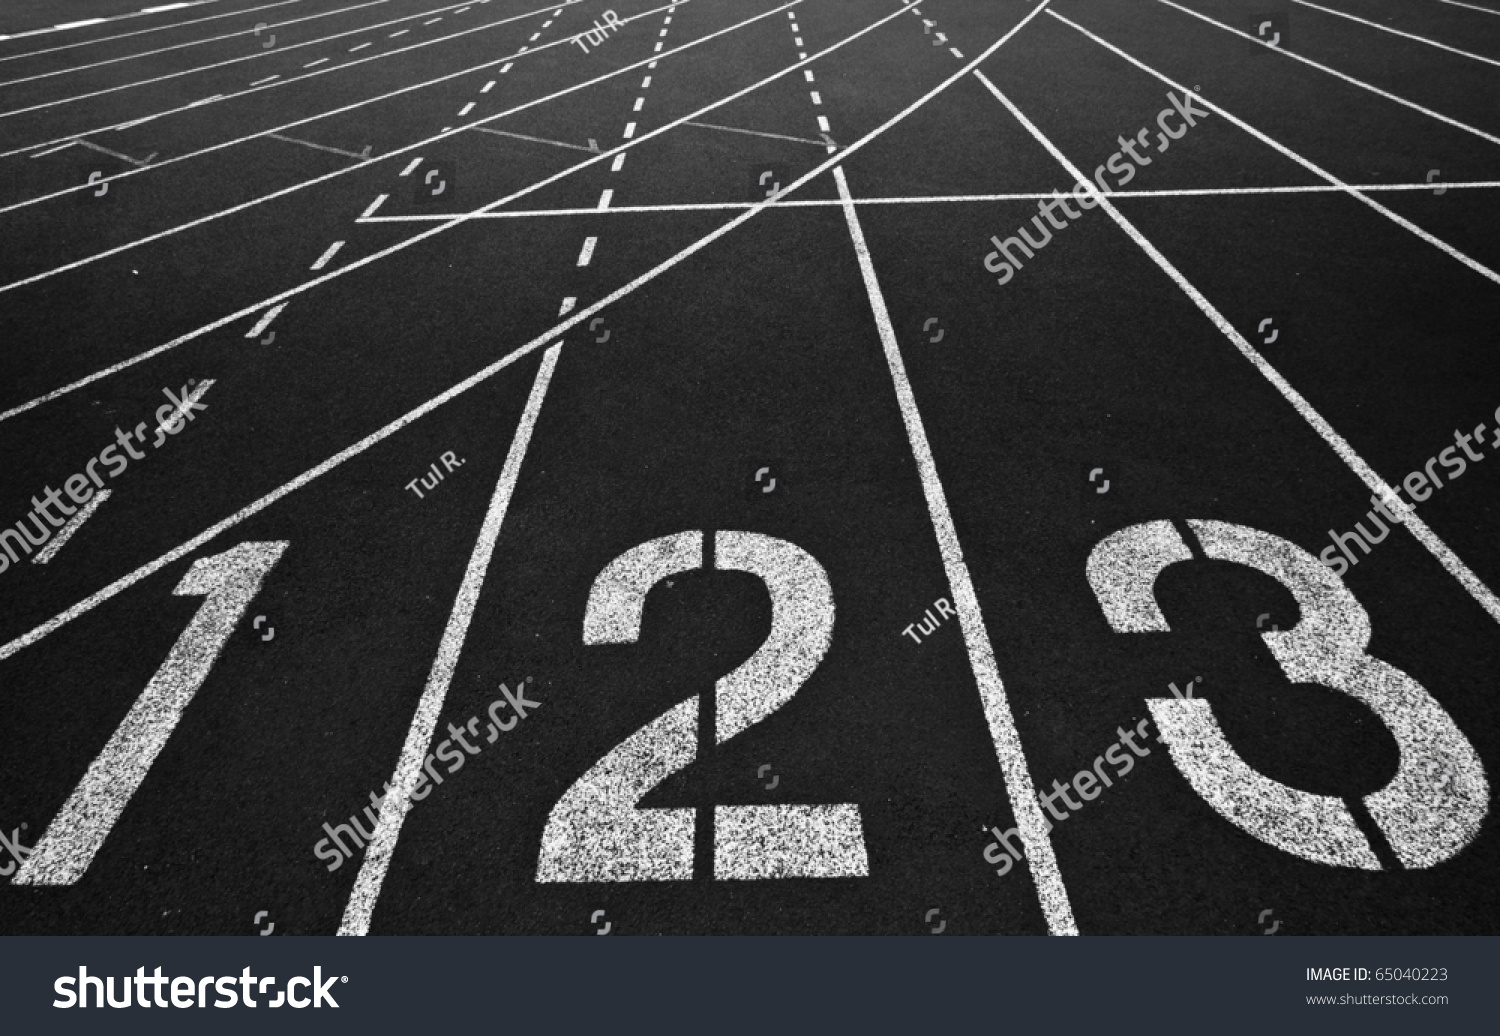 Track And Field Numbers